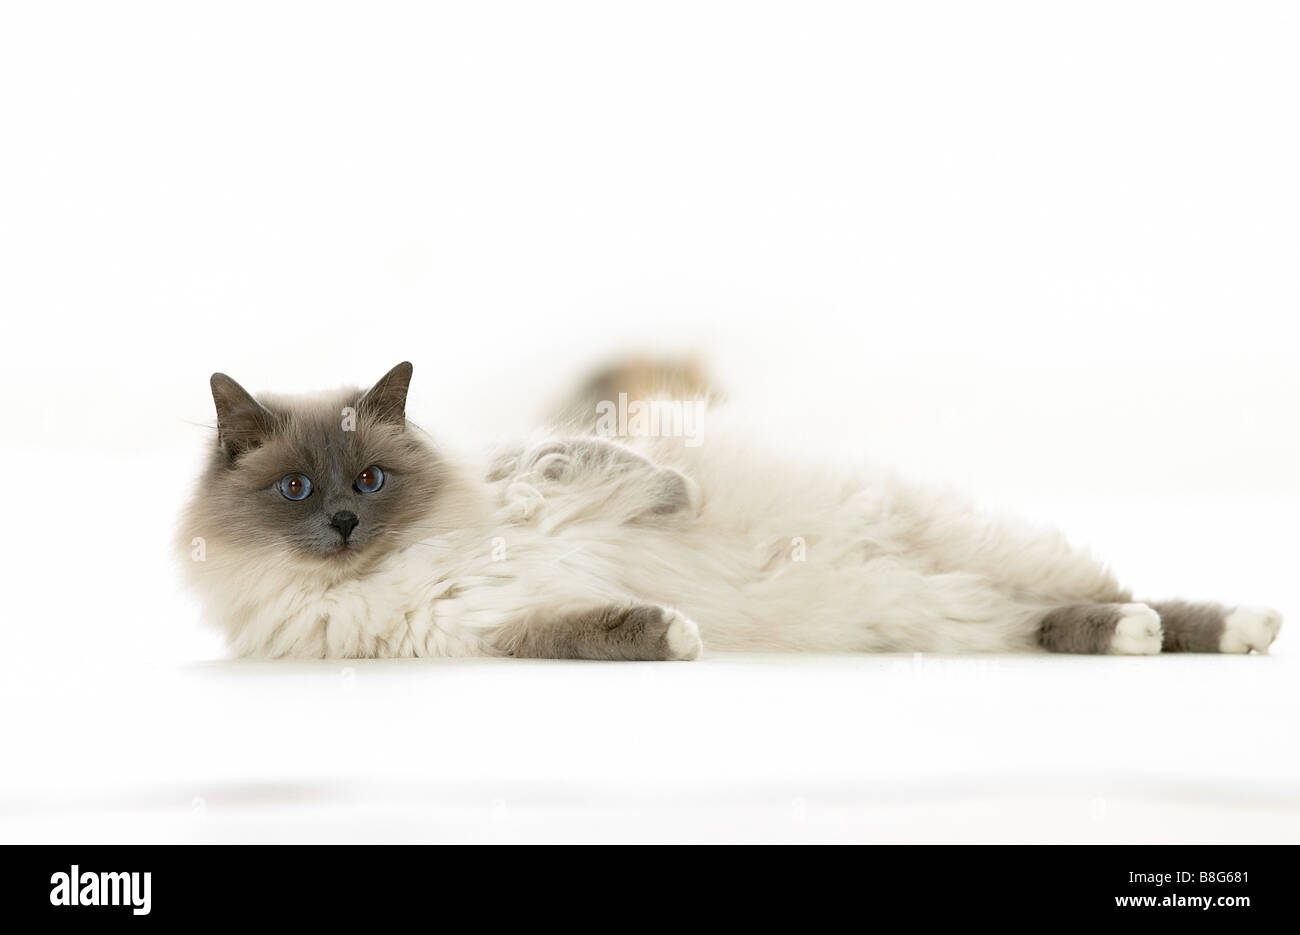 Sacred cat of Burma - lying - cut out Stock Photo